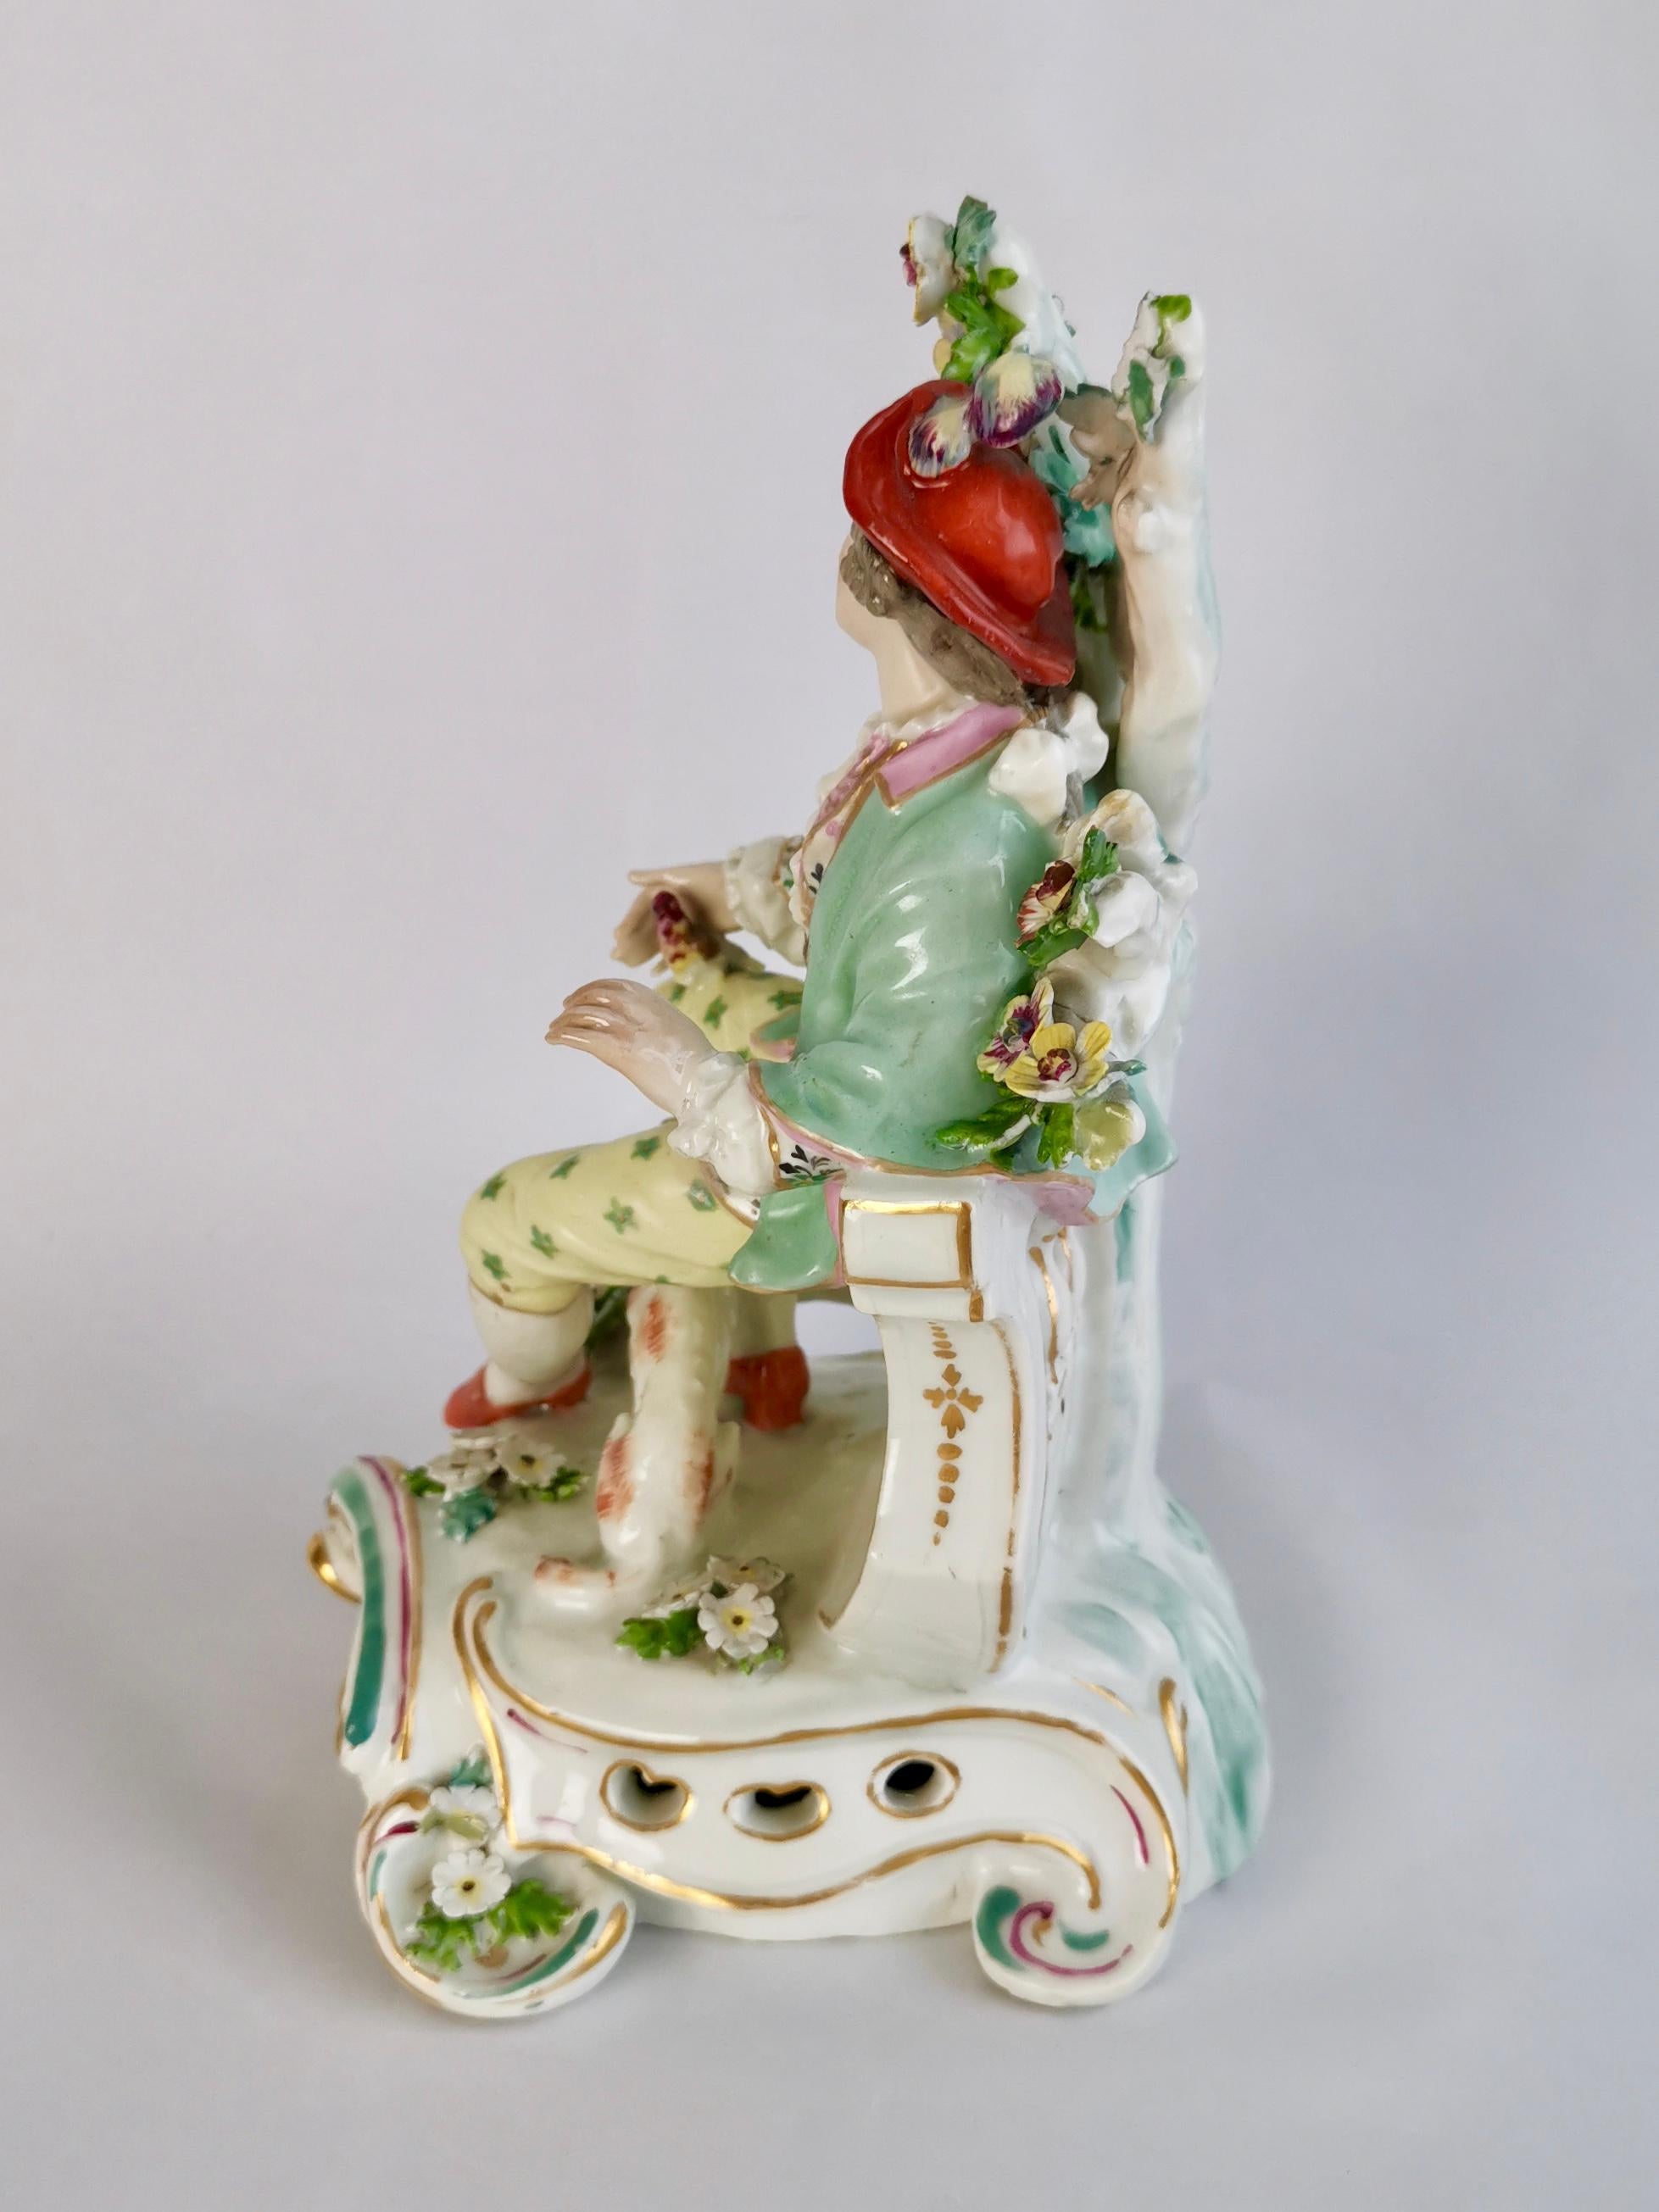 This is a beautiful figure of a gentleman with a dog and a bird, made by Edme Samson in Paris in the Derby style. 

Edme Samson was founded in Paris in 1845 and specialised in making replacements for valuable items of the French gentry and